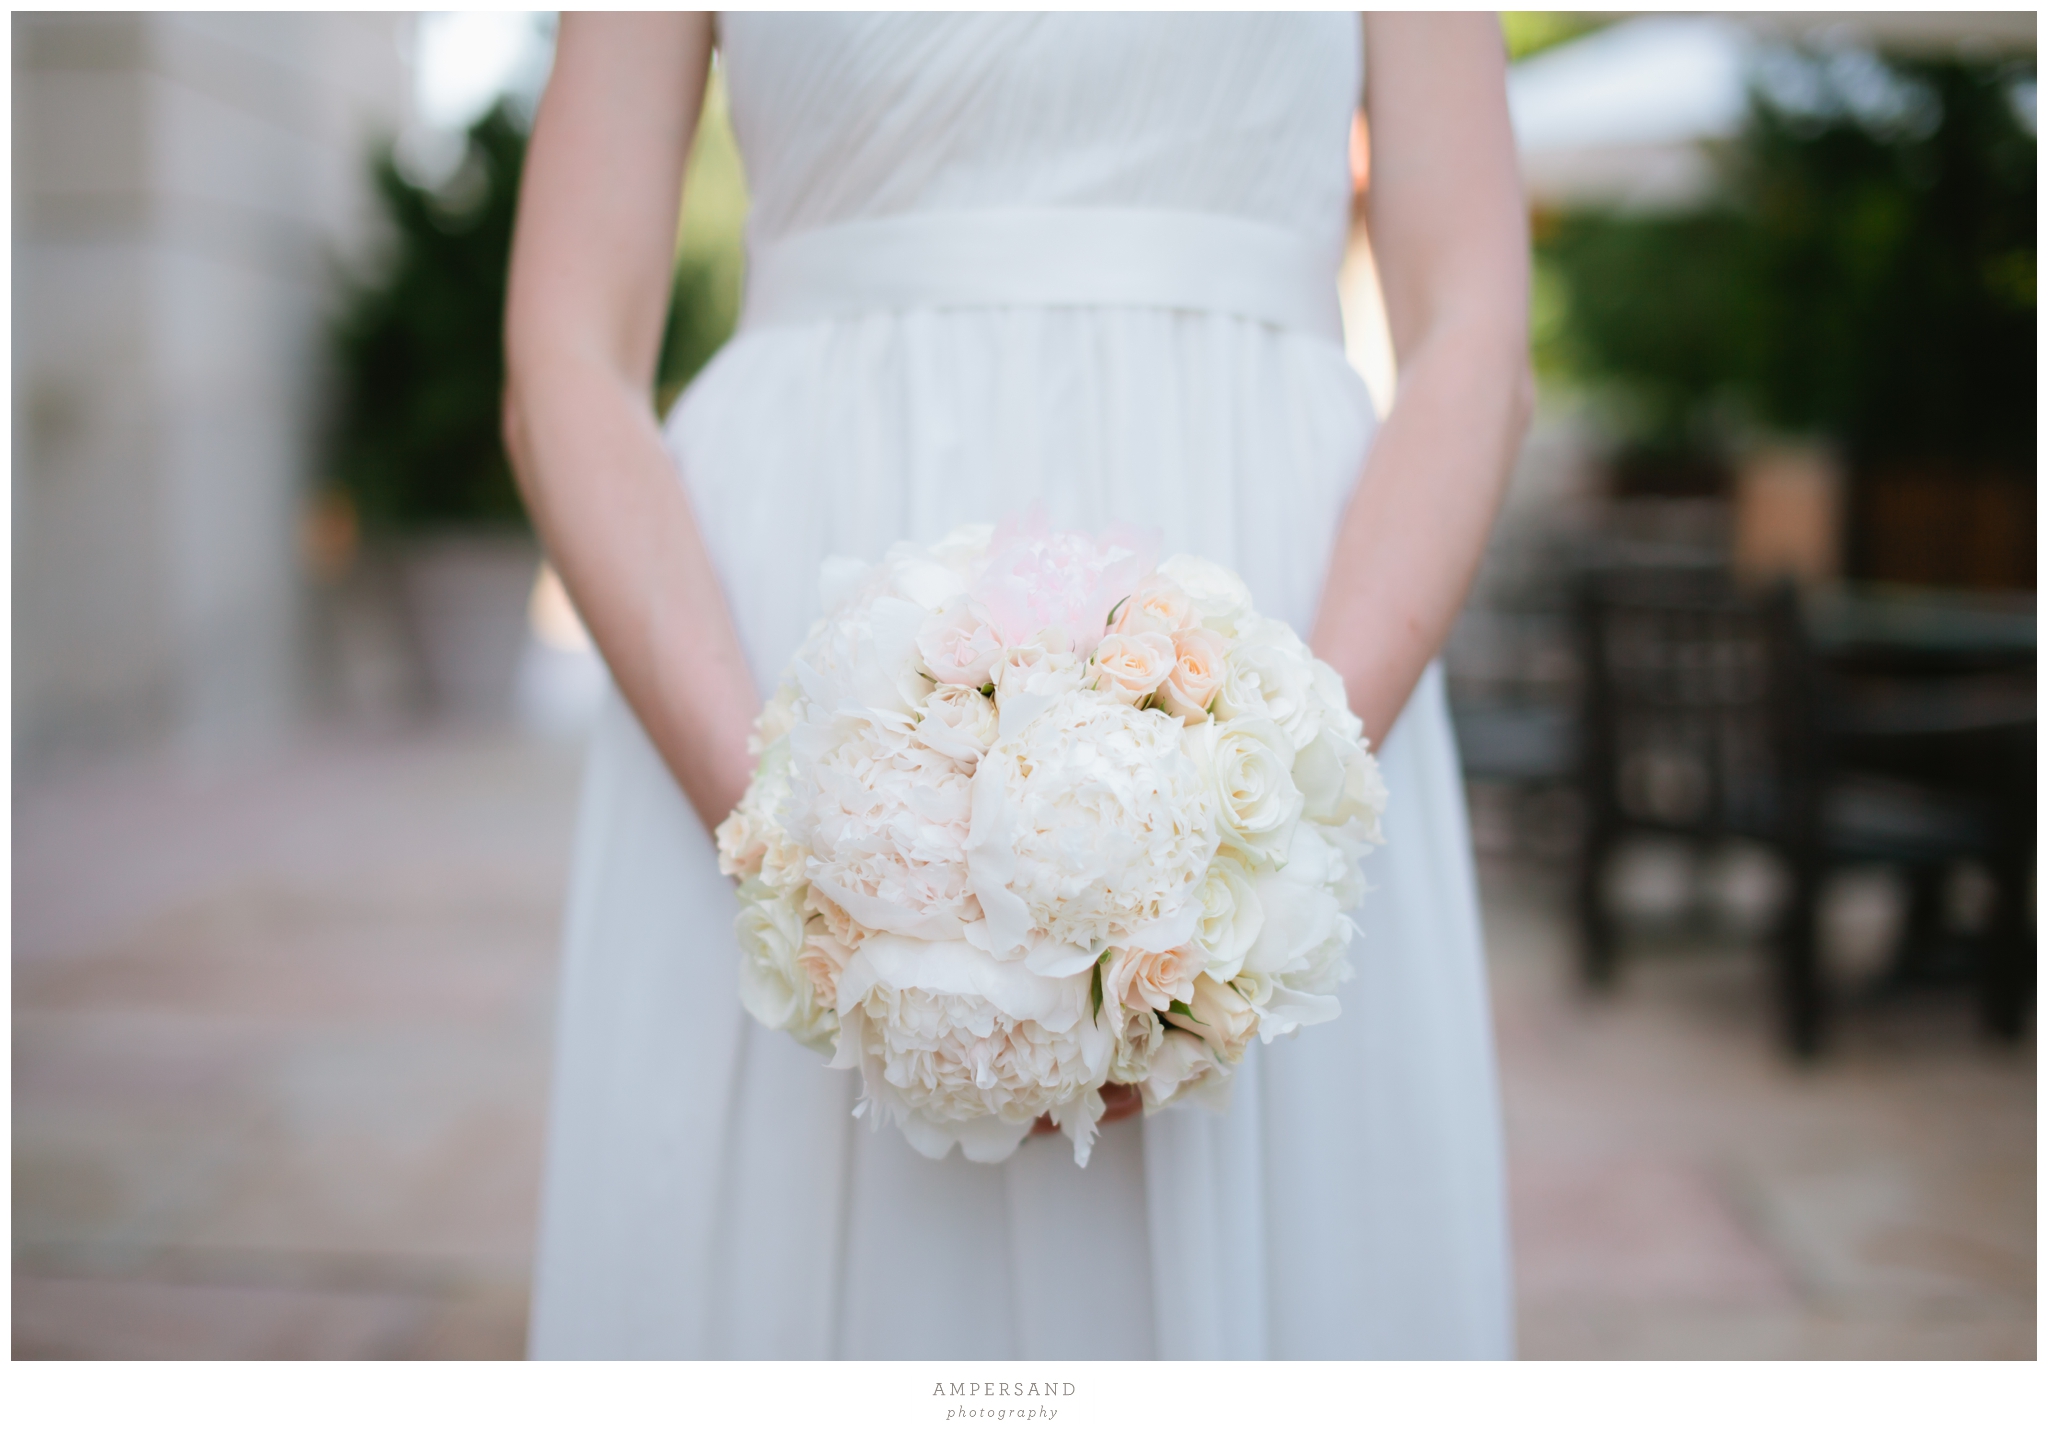 Flowers by BrookHill Florists   // Photos by Ampersand Photography